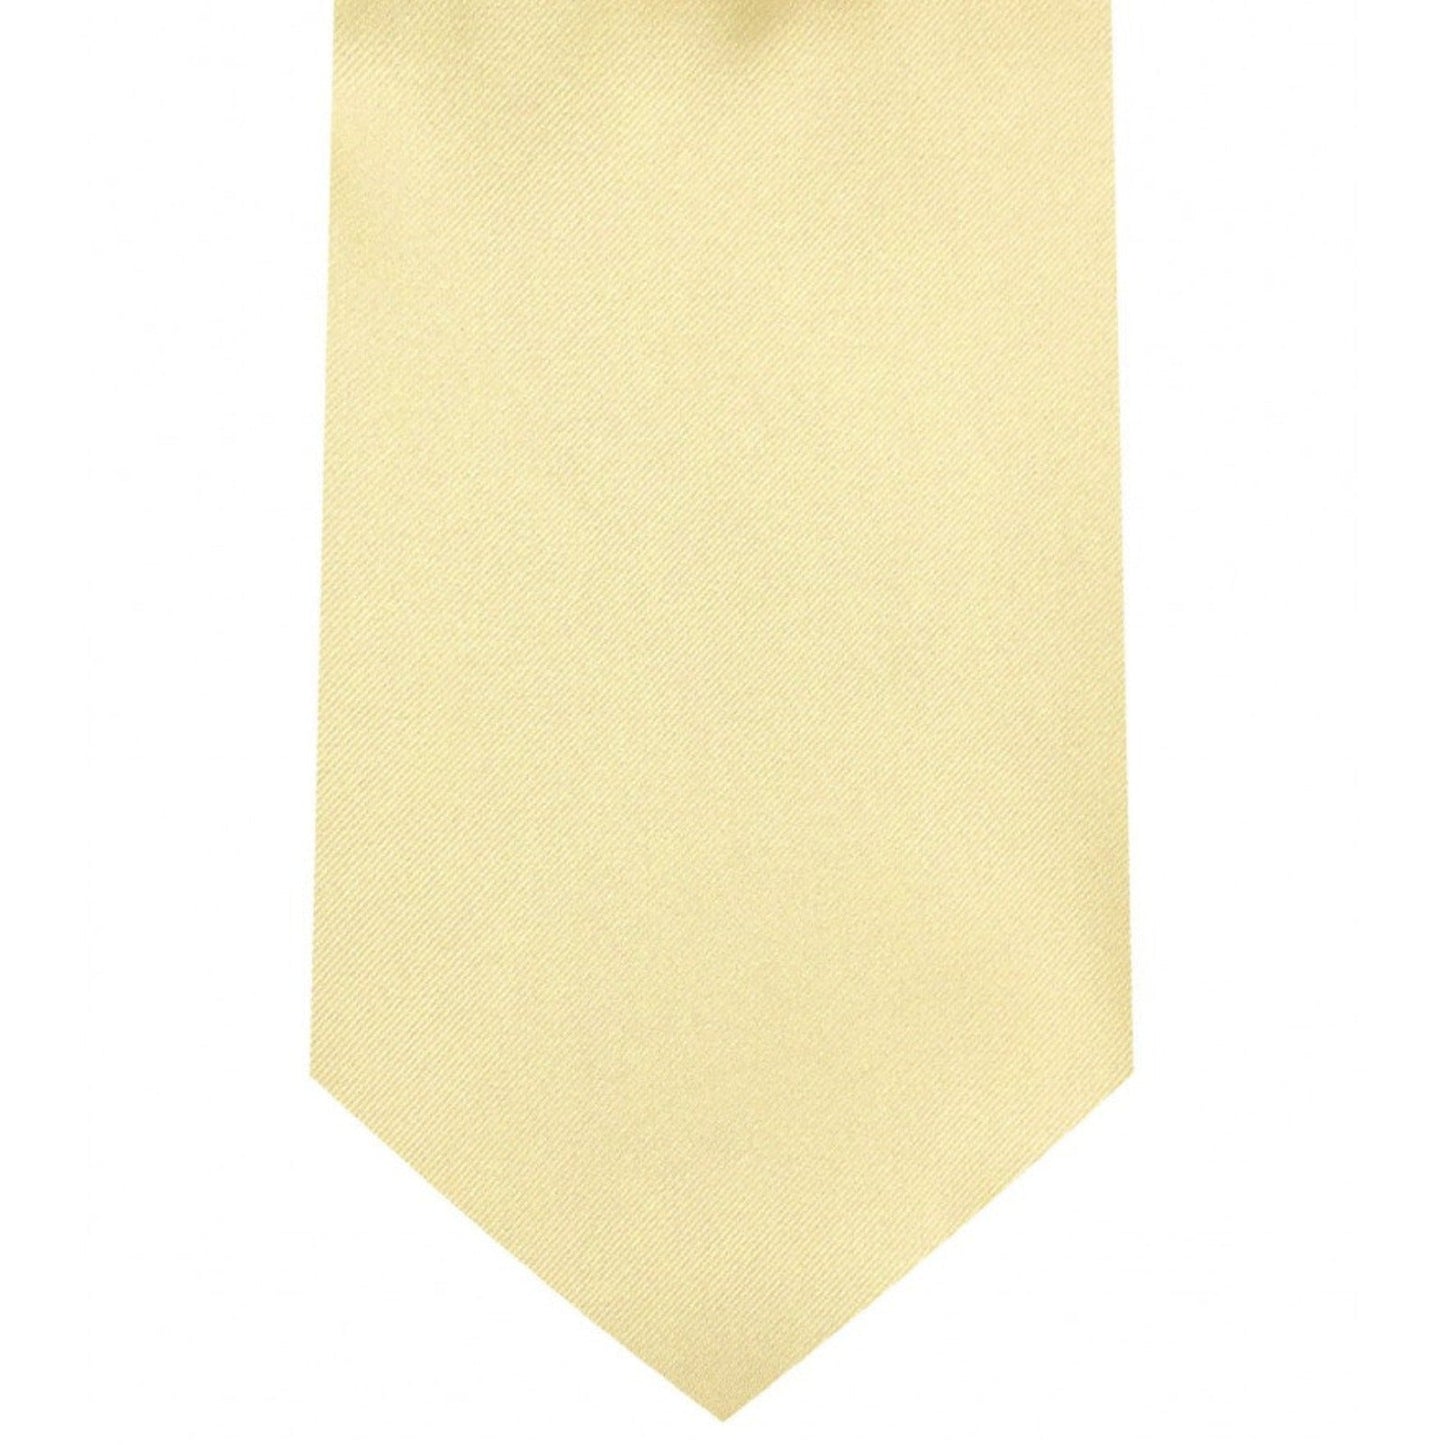 Classic Canary Tie Regular width 3.5 inches With Matching Pocket Square | KCT Menswear 